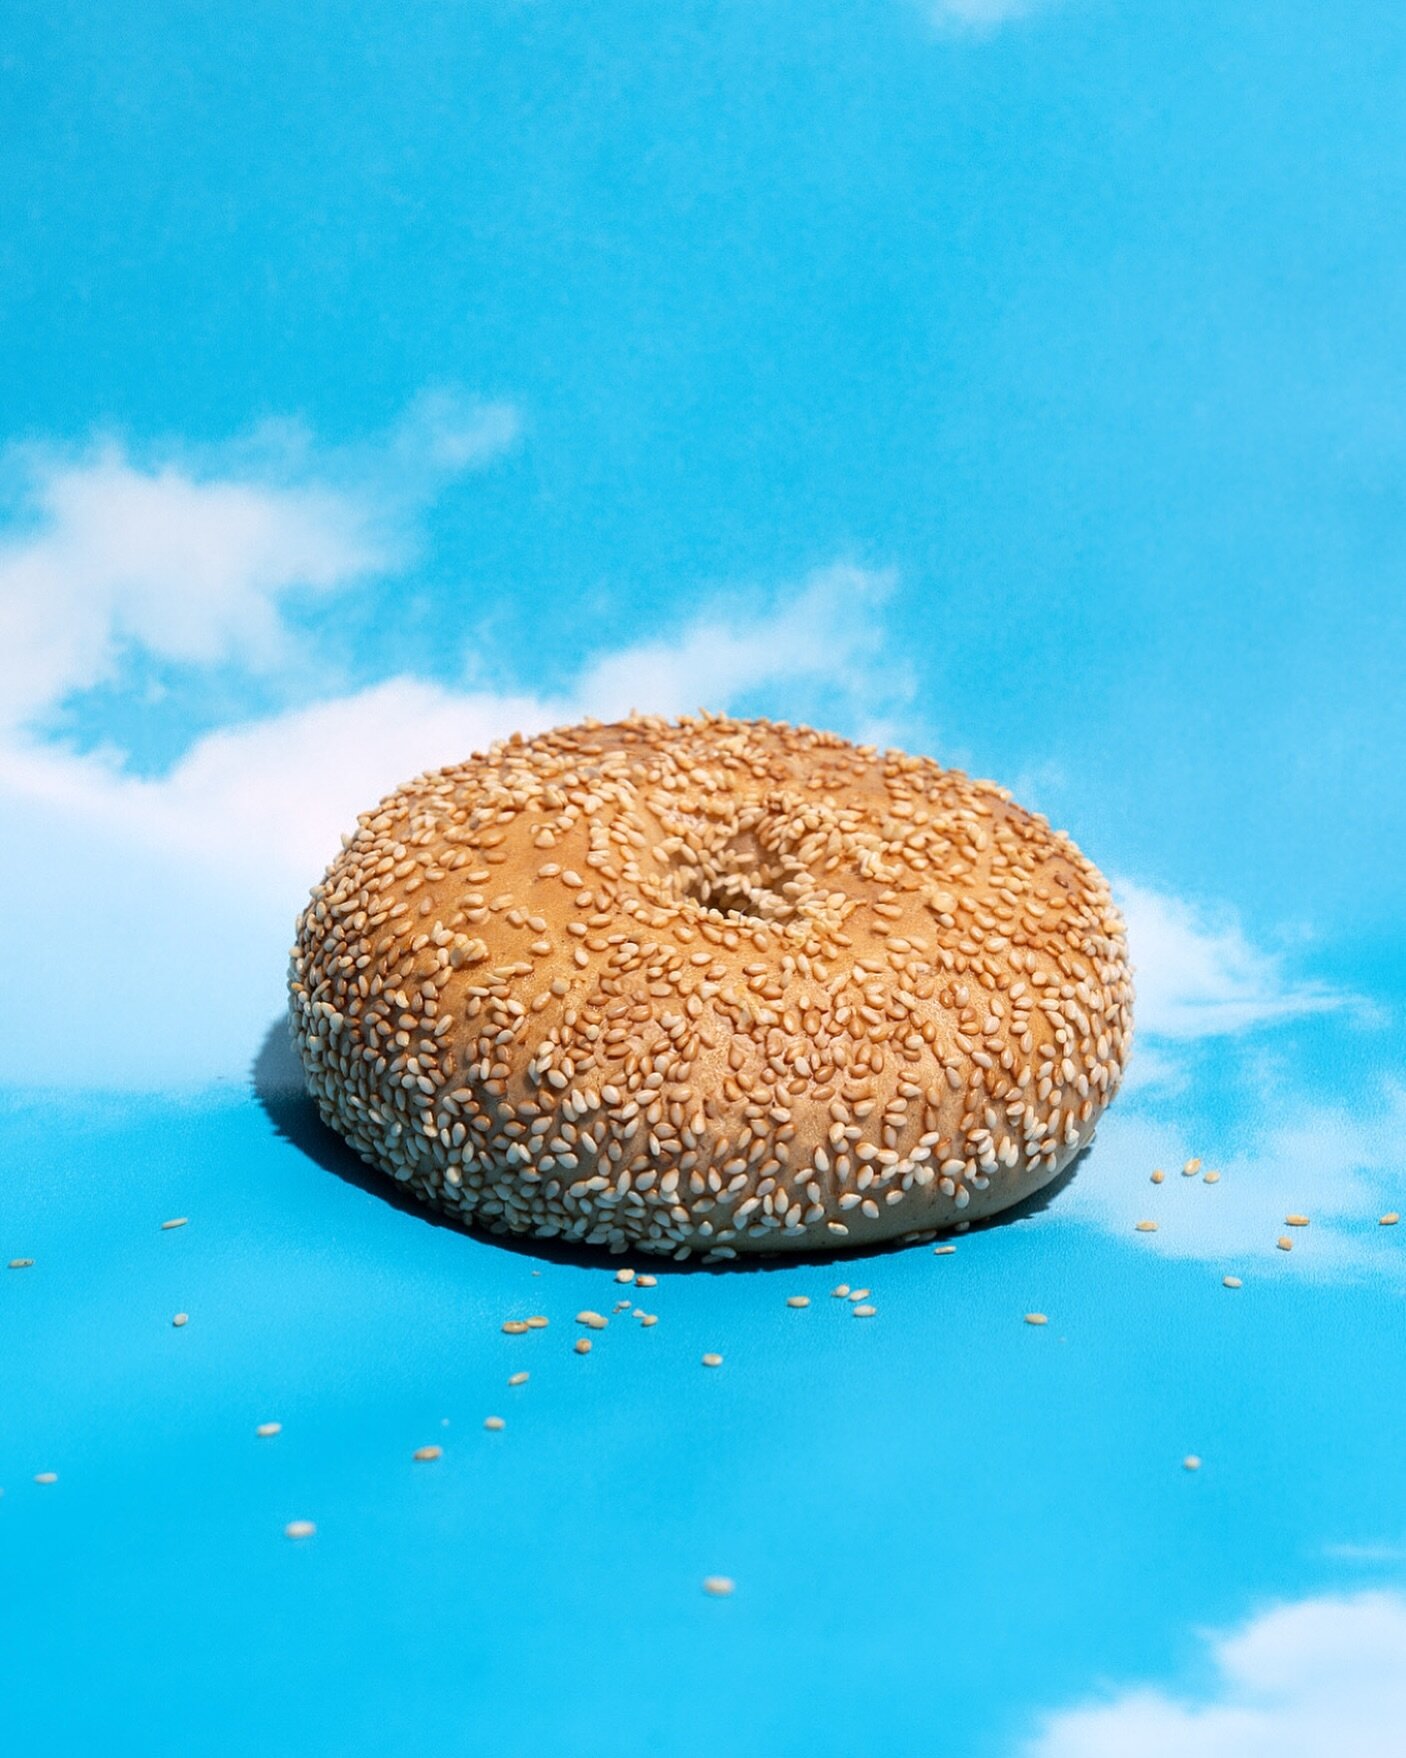 Open Sesame to a world of authentic tasting bagels, the gluten free way. 

#glutenfreewithoutcompromise #glutenfree #glutenfreebagel